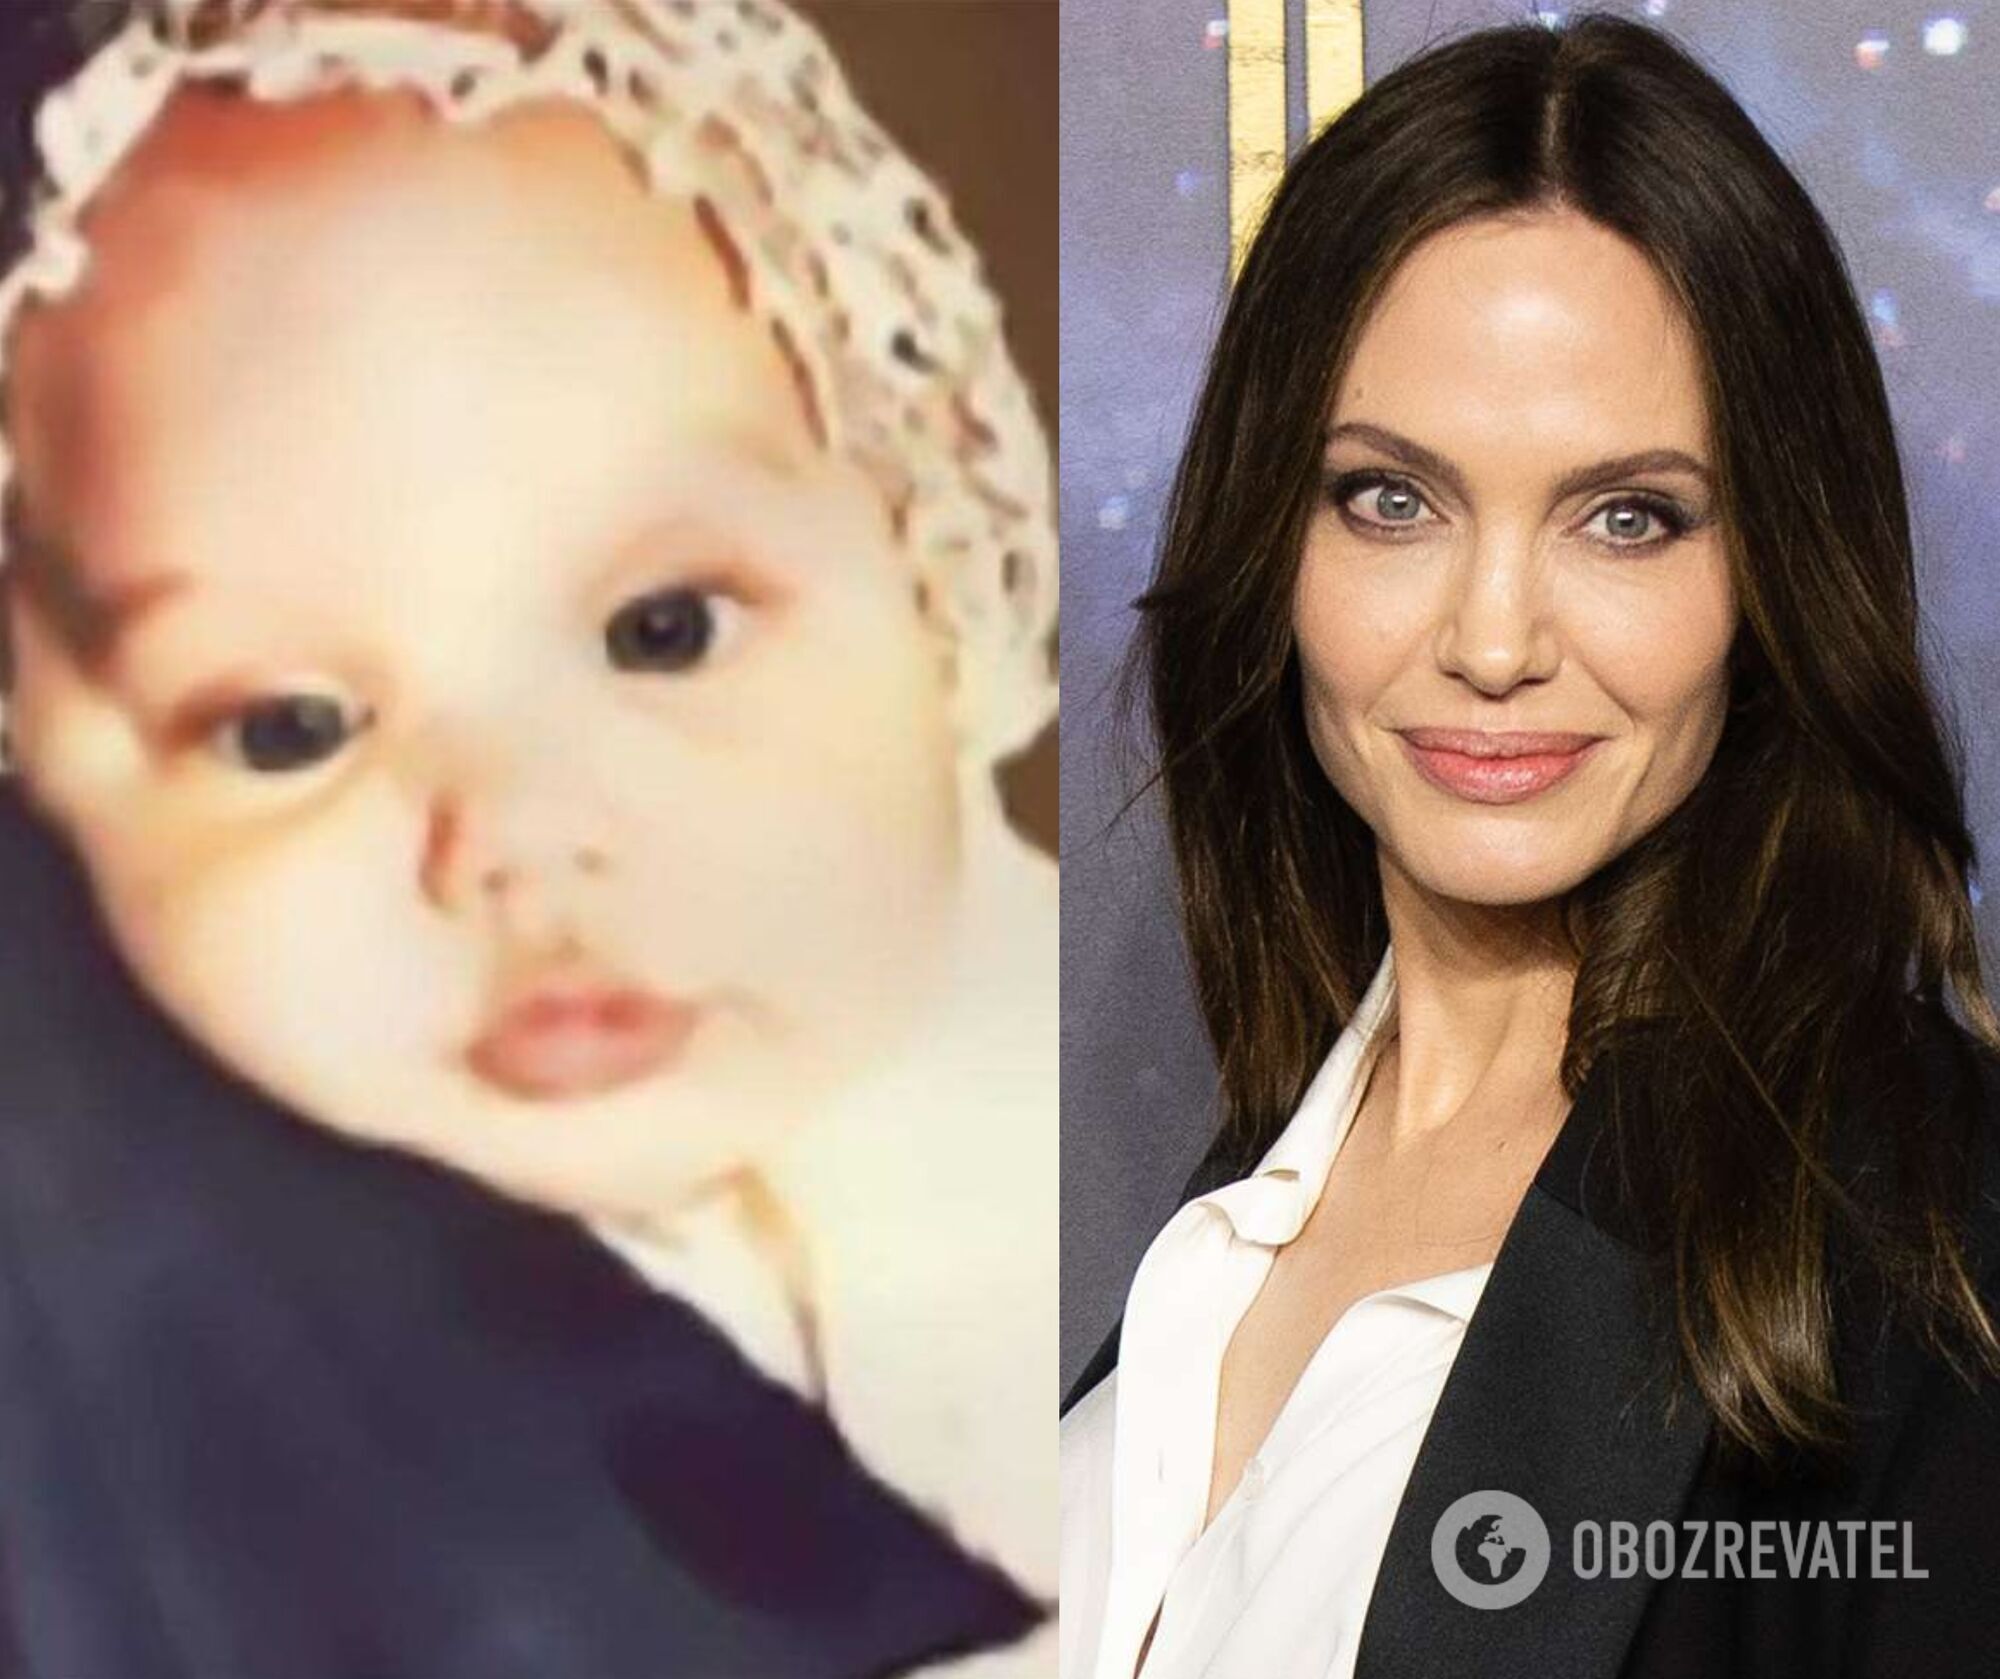 Rare photos of Angelina Jolie, Prince William, Marilyn Monroe and other celebrities in early childhood